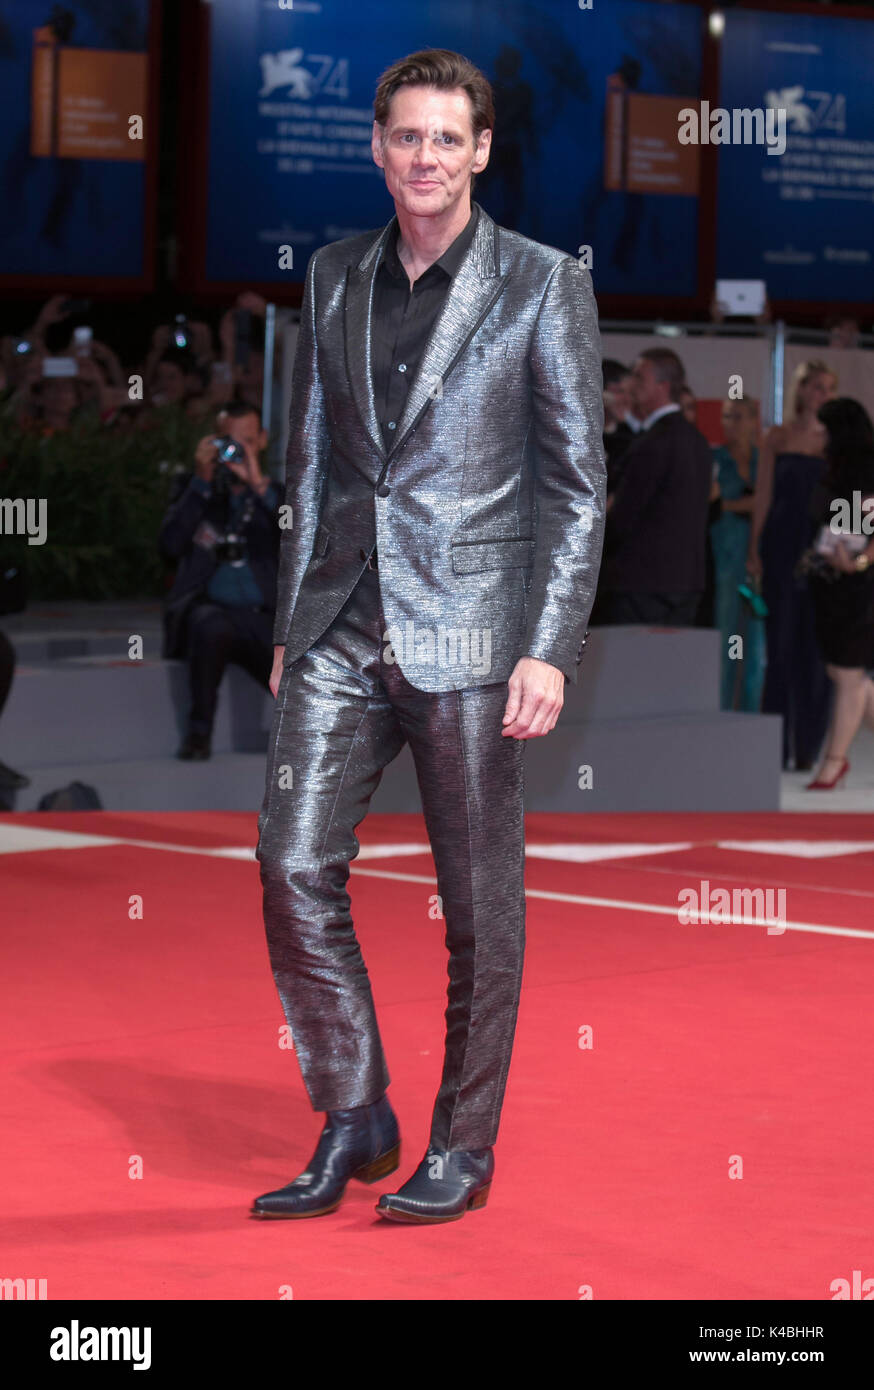 Venice, Italy. 05th Sep, 2017. Actor Jim Carrey attends the premiere of the movie 'Jim & Andy: The Great Beyond - The Story of Jim Carrey & Andy Kaufman Featuring a Very Special, Contractually Obligated Mention of Tony Clifton' during the 74th Venice Film Festival at Palazzo del Cinema in Venice, Italy, on 05 September 2017. - NO WIRE SERVICE - Photo: Hubert Boesl/dpa/Alamy Live News Stock Photo